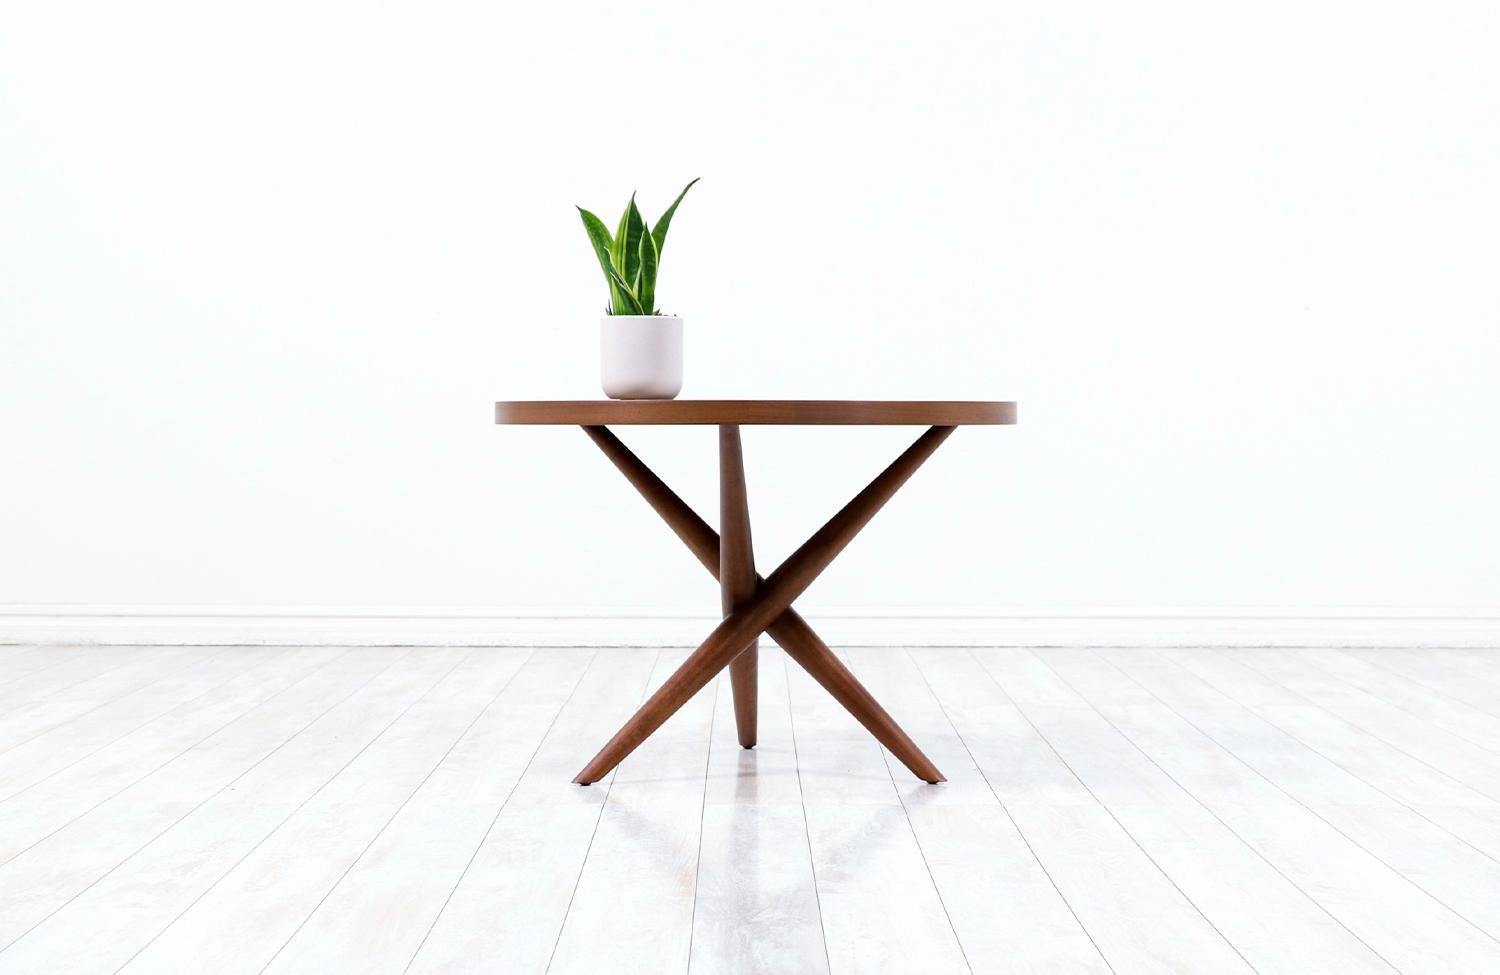 Elegant modern side table designed by T.H. Robsjohn-Gibbings for Widdicomb in the United States circa 1950s. This sophisticated side table features a softly contoured walnut wood top over a tripod base creating a handsome silhouette with three